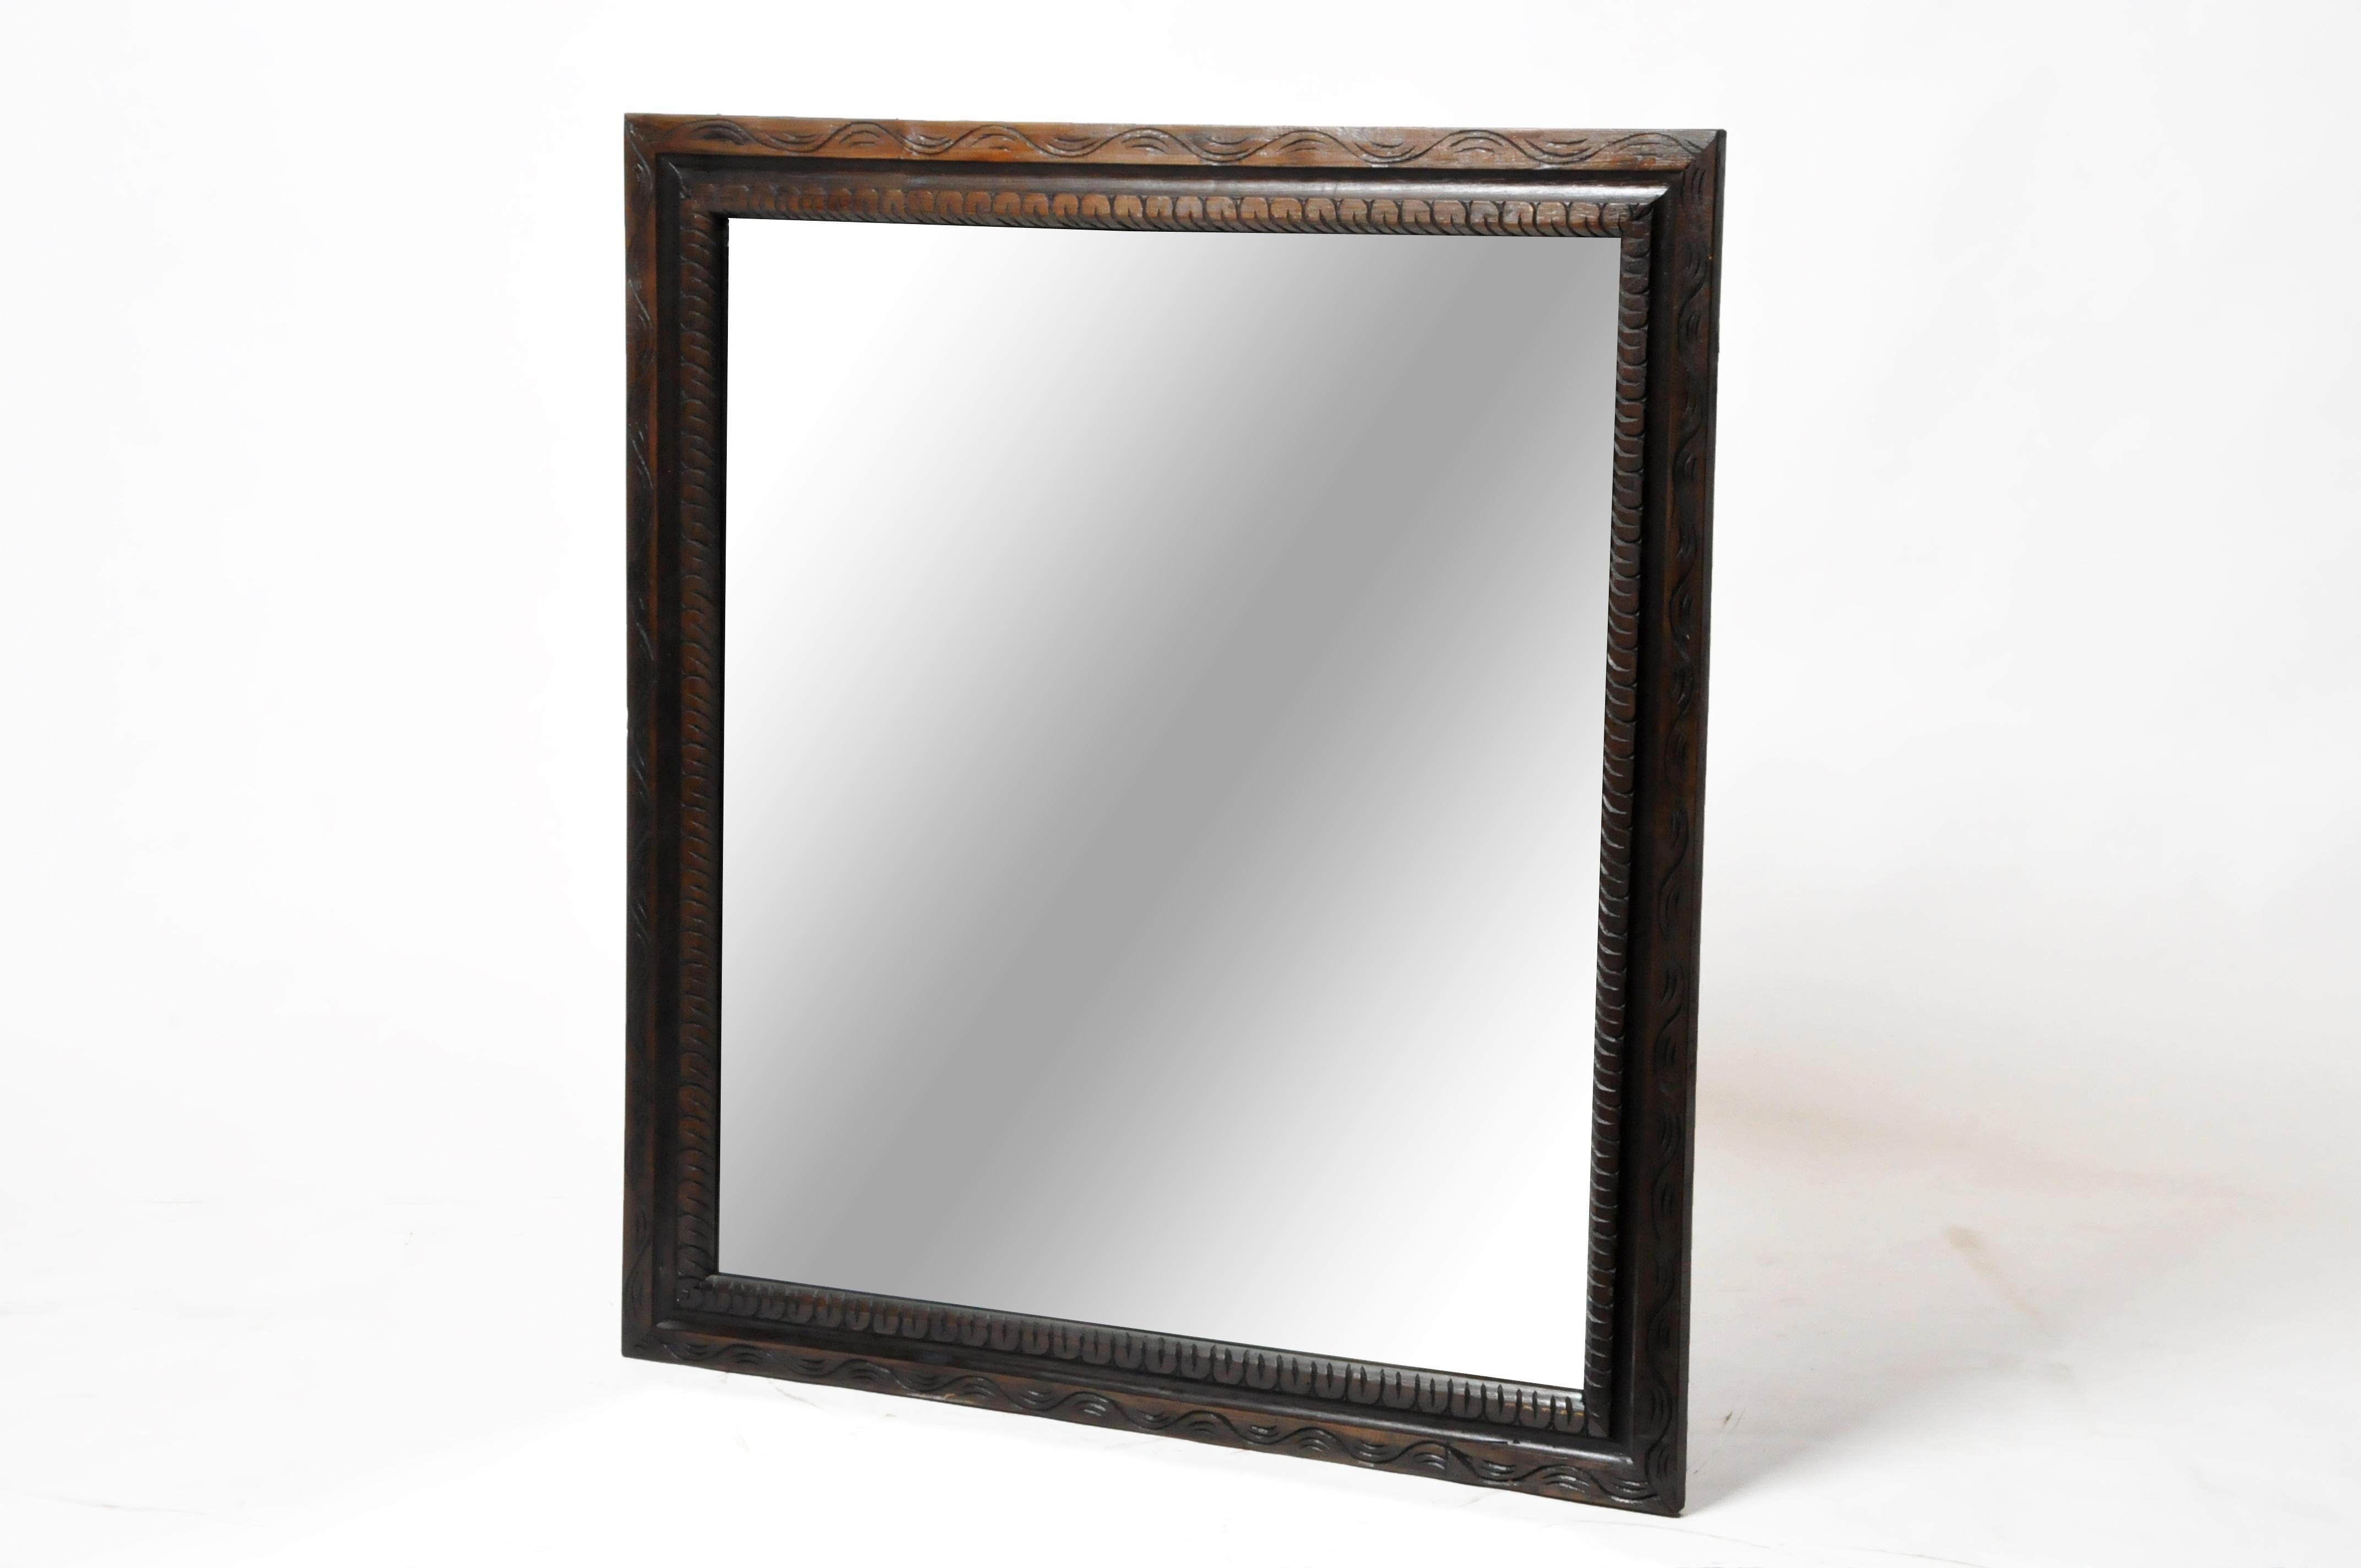 This mirror was hand-carved from teak wood. The frame is from a workshop in Chiang Mai, Thailand; it is new. Chiang Mai is the center of the wood carving industry in Thailand and is the source of many unique handicrafts.   For this mirror,